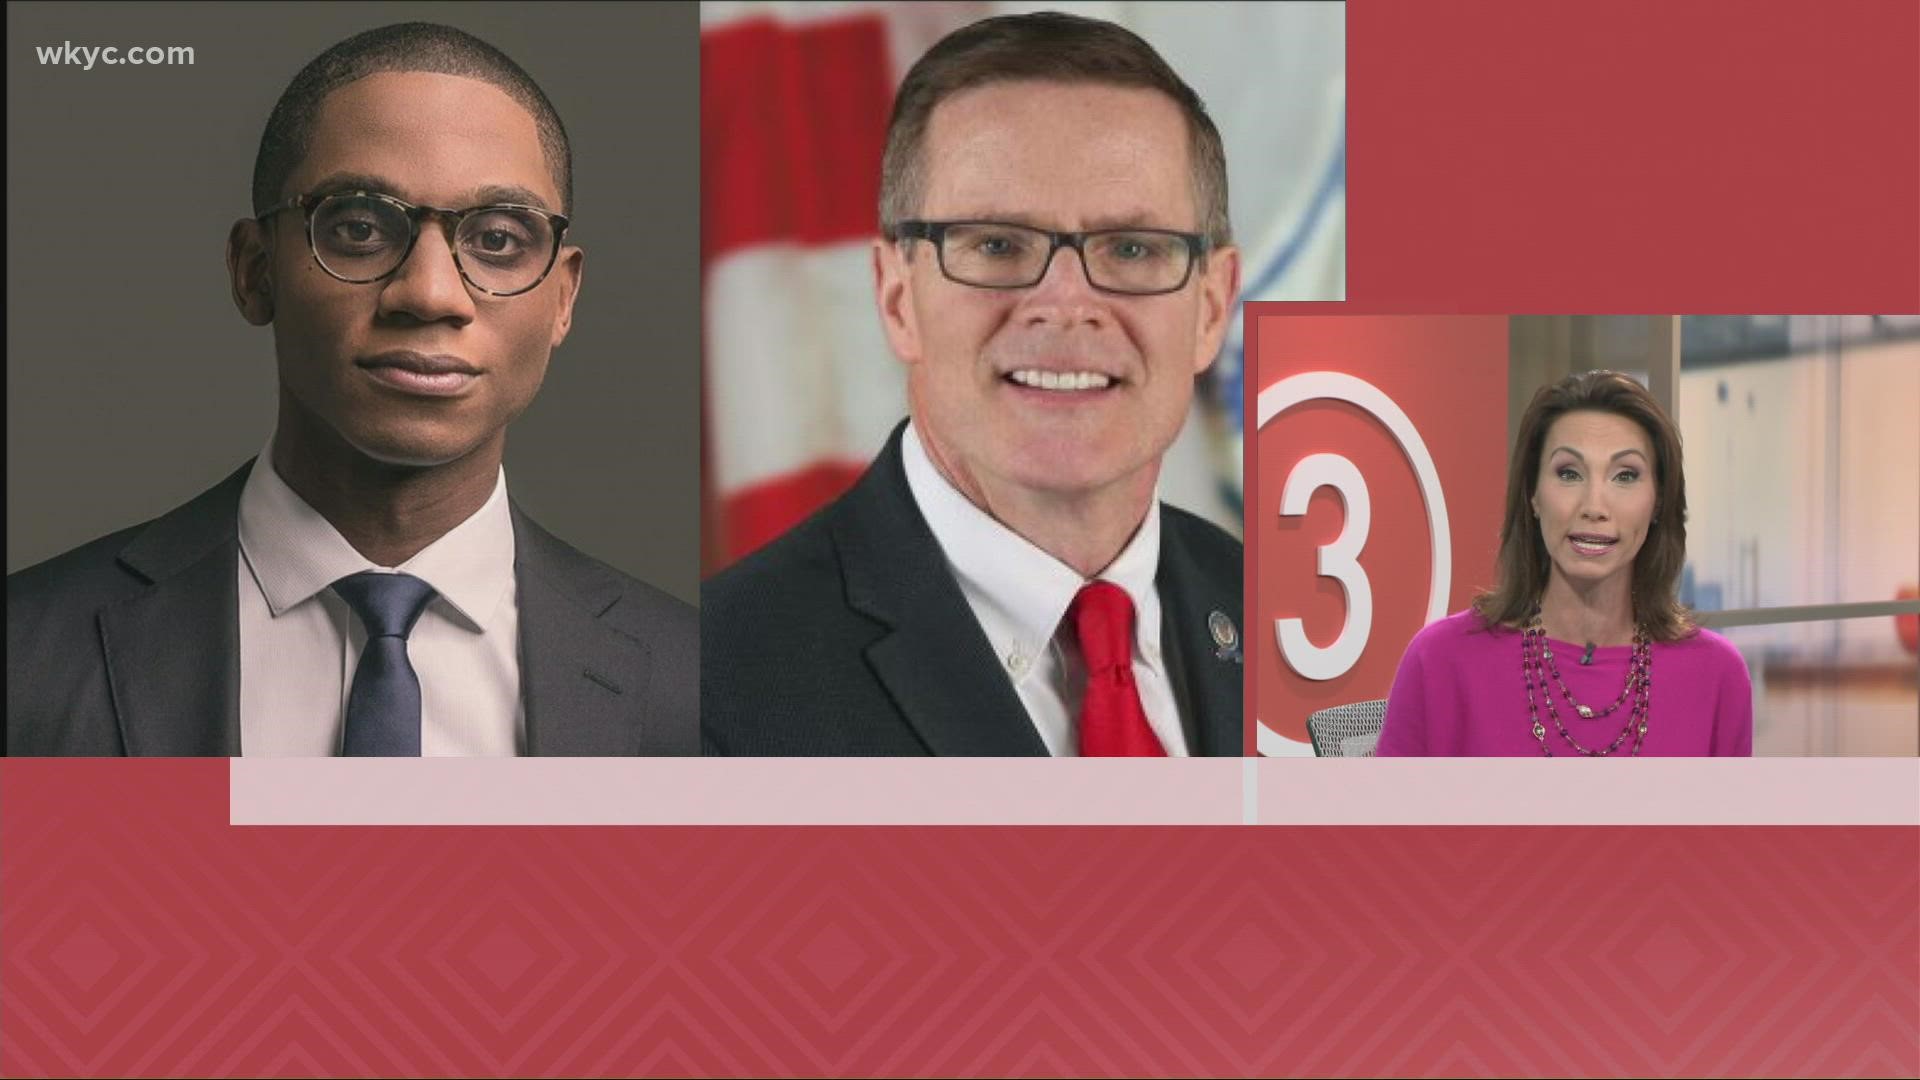 Justin Bill and Kevin Kelley will battle for the Mayor of Cleveland in November.